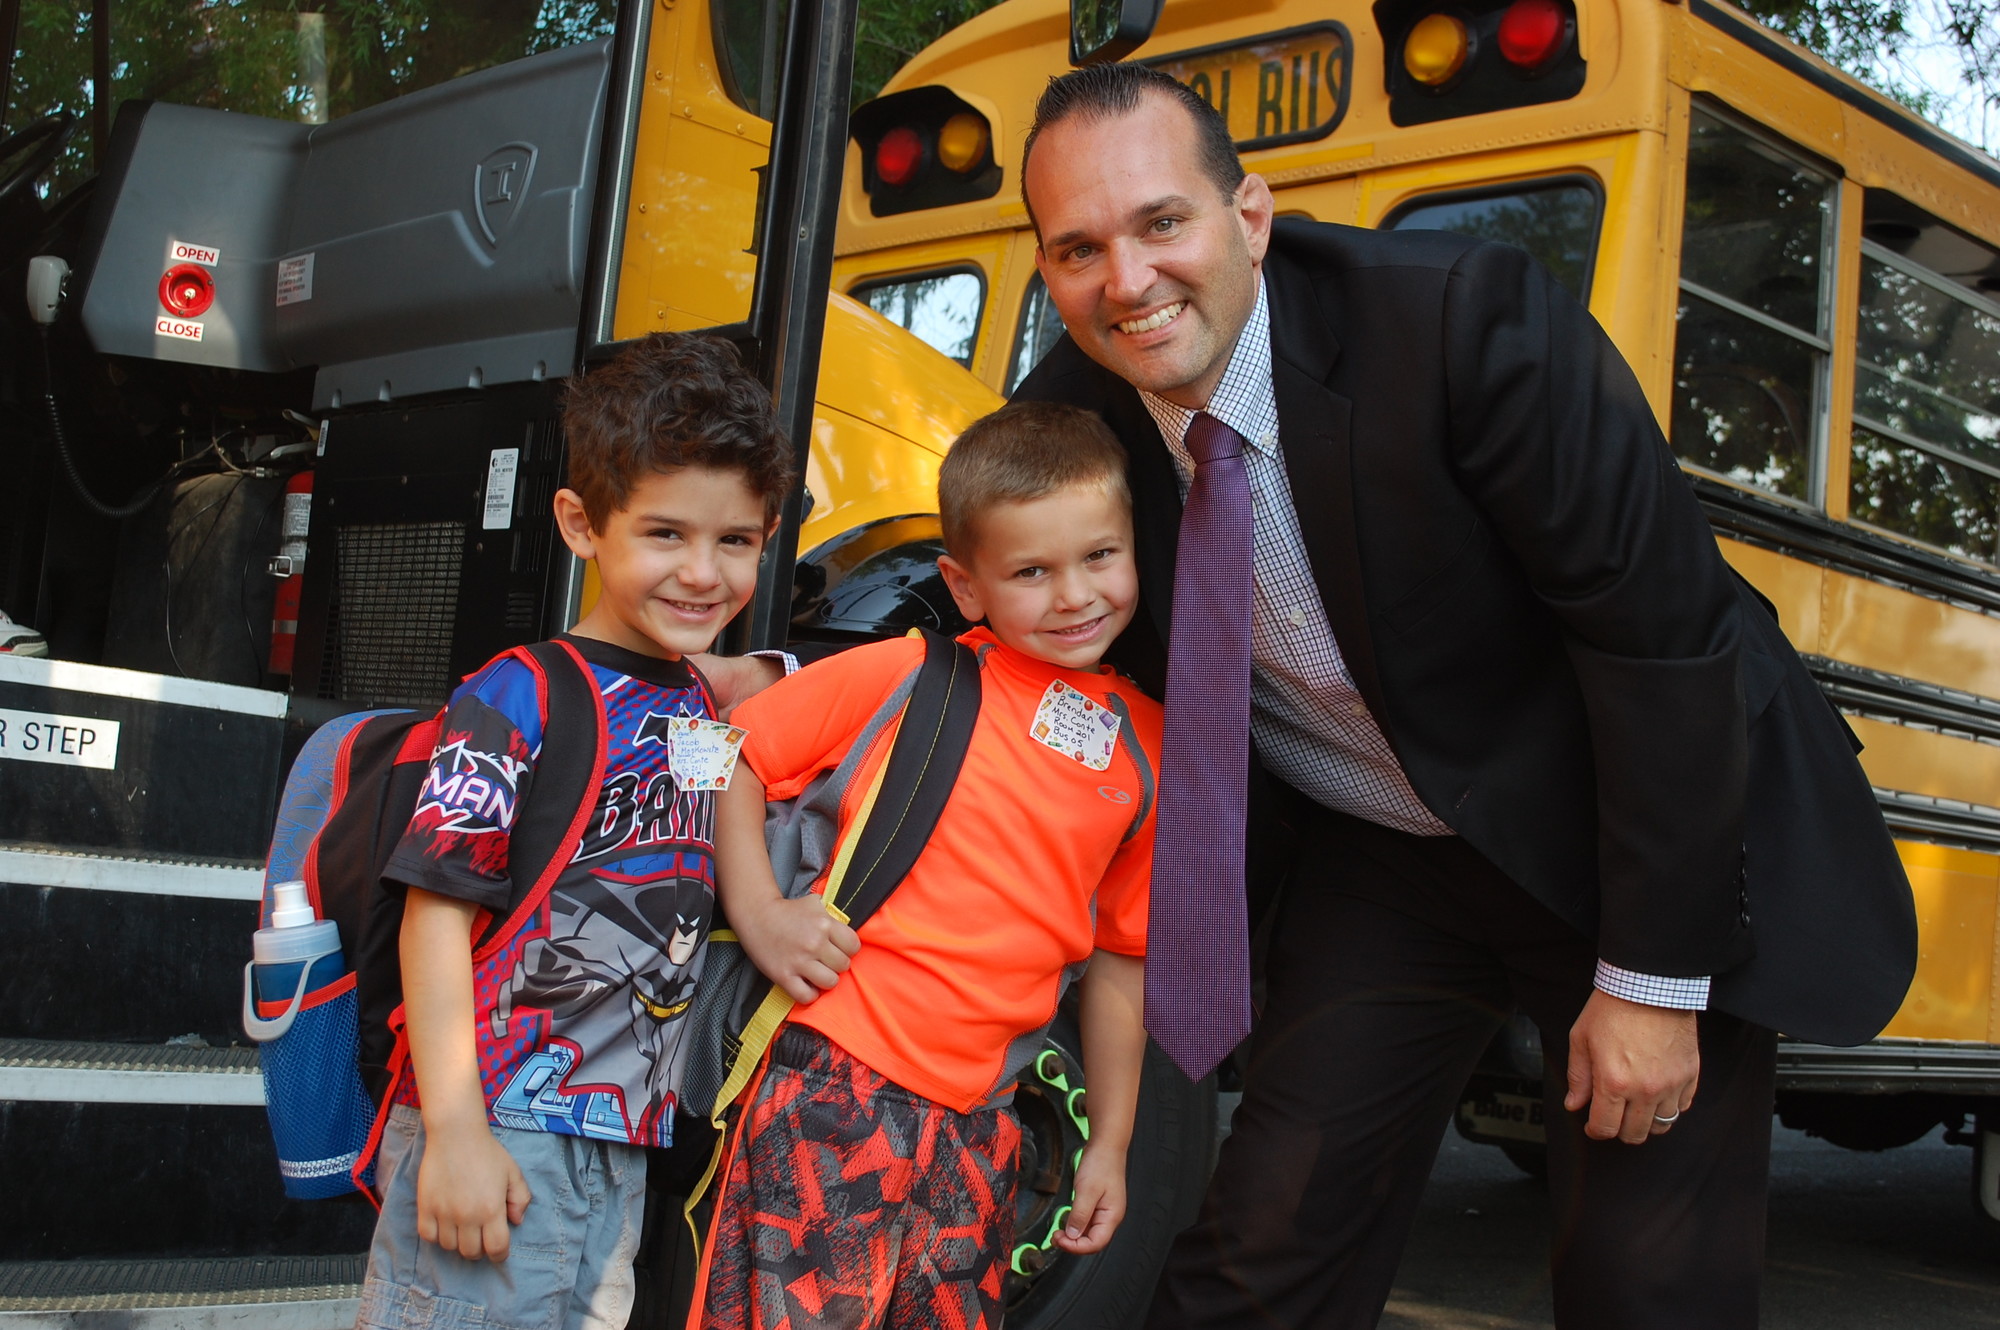 Forest Lake Elementary School Principal Anthony Ciuffo greeted kindergartners and neighbors Jacob Moskowitz, left, and Brenden Wood as they arrived by bus for their first day of school on Sept. 1.